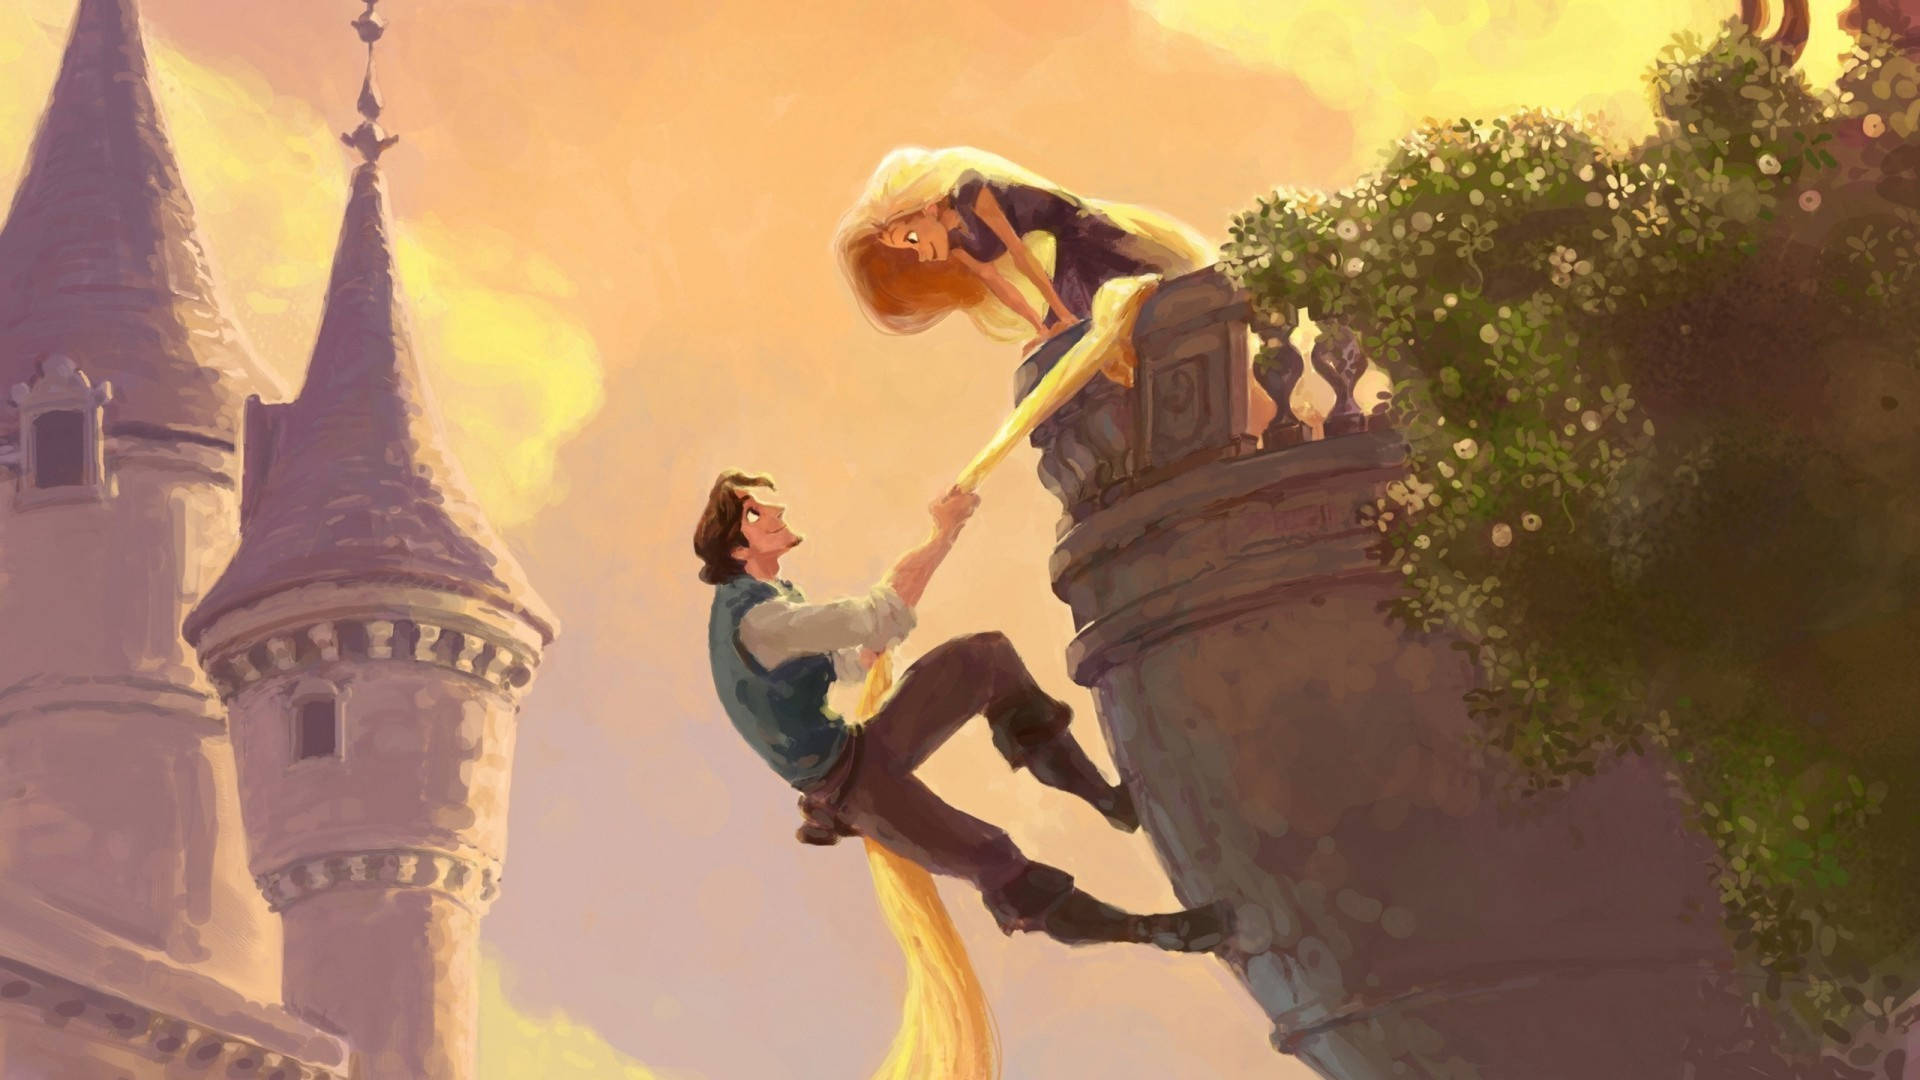 Rapunzel and Flynn prepare for their escape from the castle balcony Wallpaper